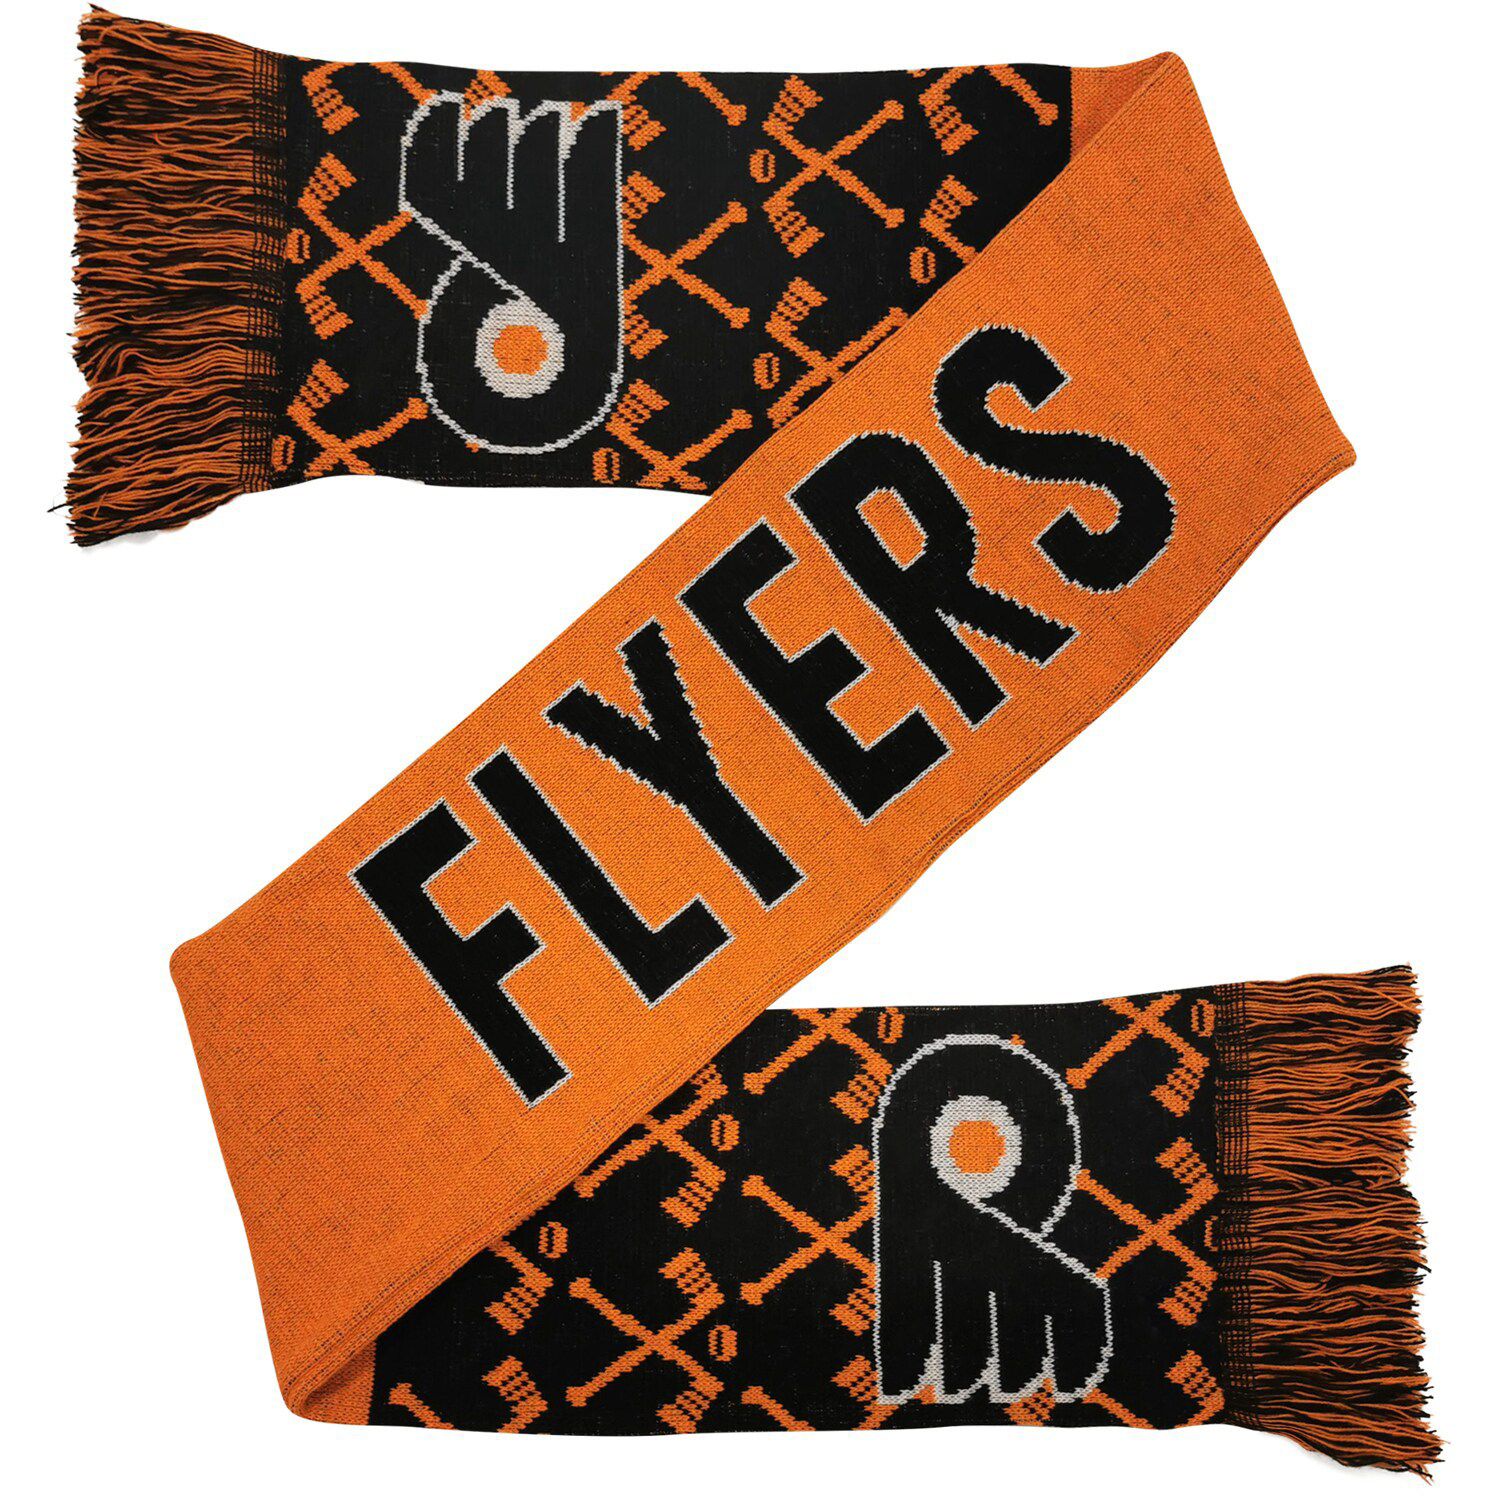 Image for Unbranded FOCO Philadelphia Flyers Reversible Thematic Scarf at Kohl's.